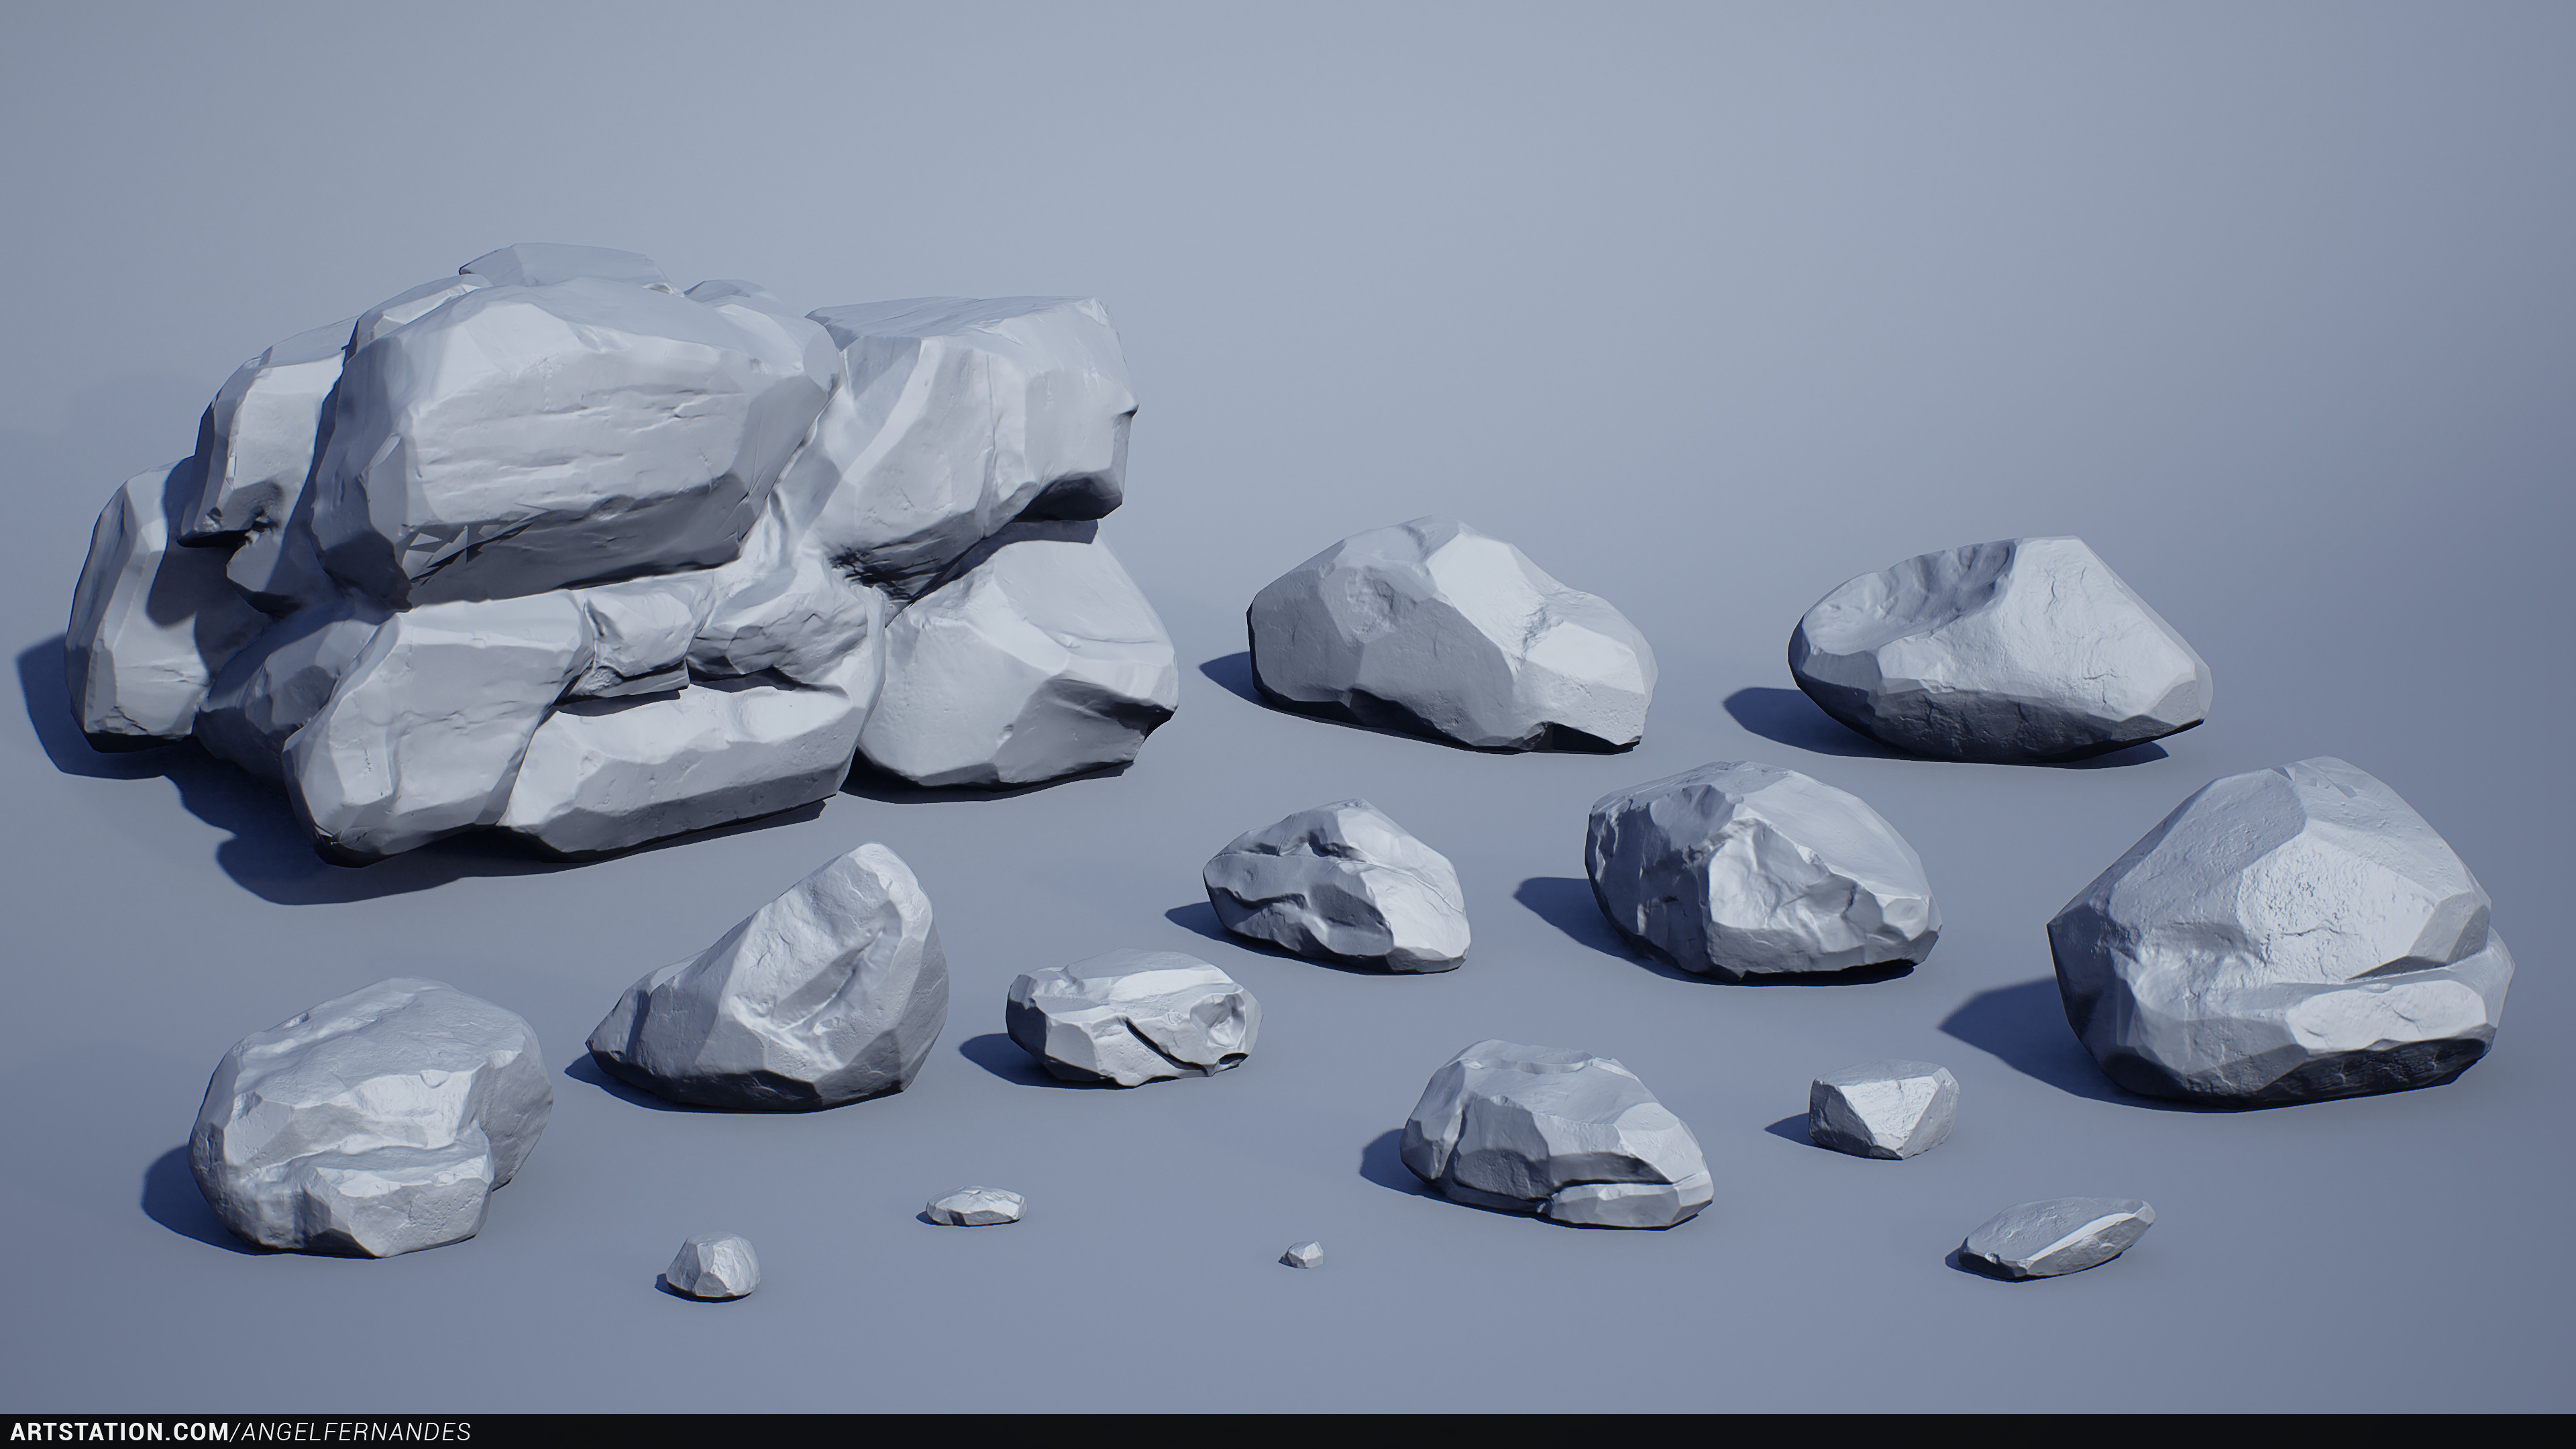 Cliff and rocks. Low-poly + normal map. Very common workflow. Sculpted and decimate in Zbrush, low poly polish and uvs in Max. Baked in Marmoset.